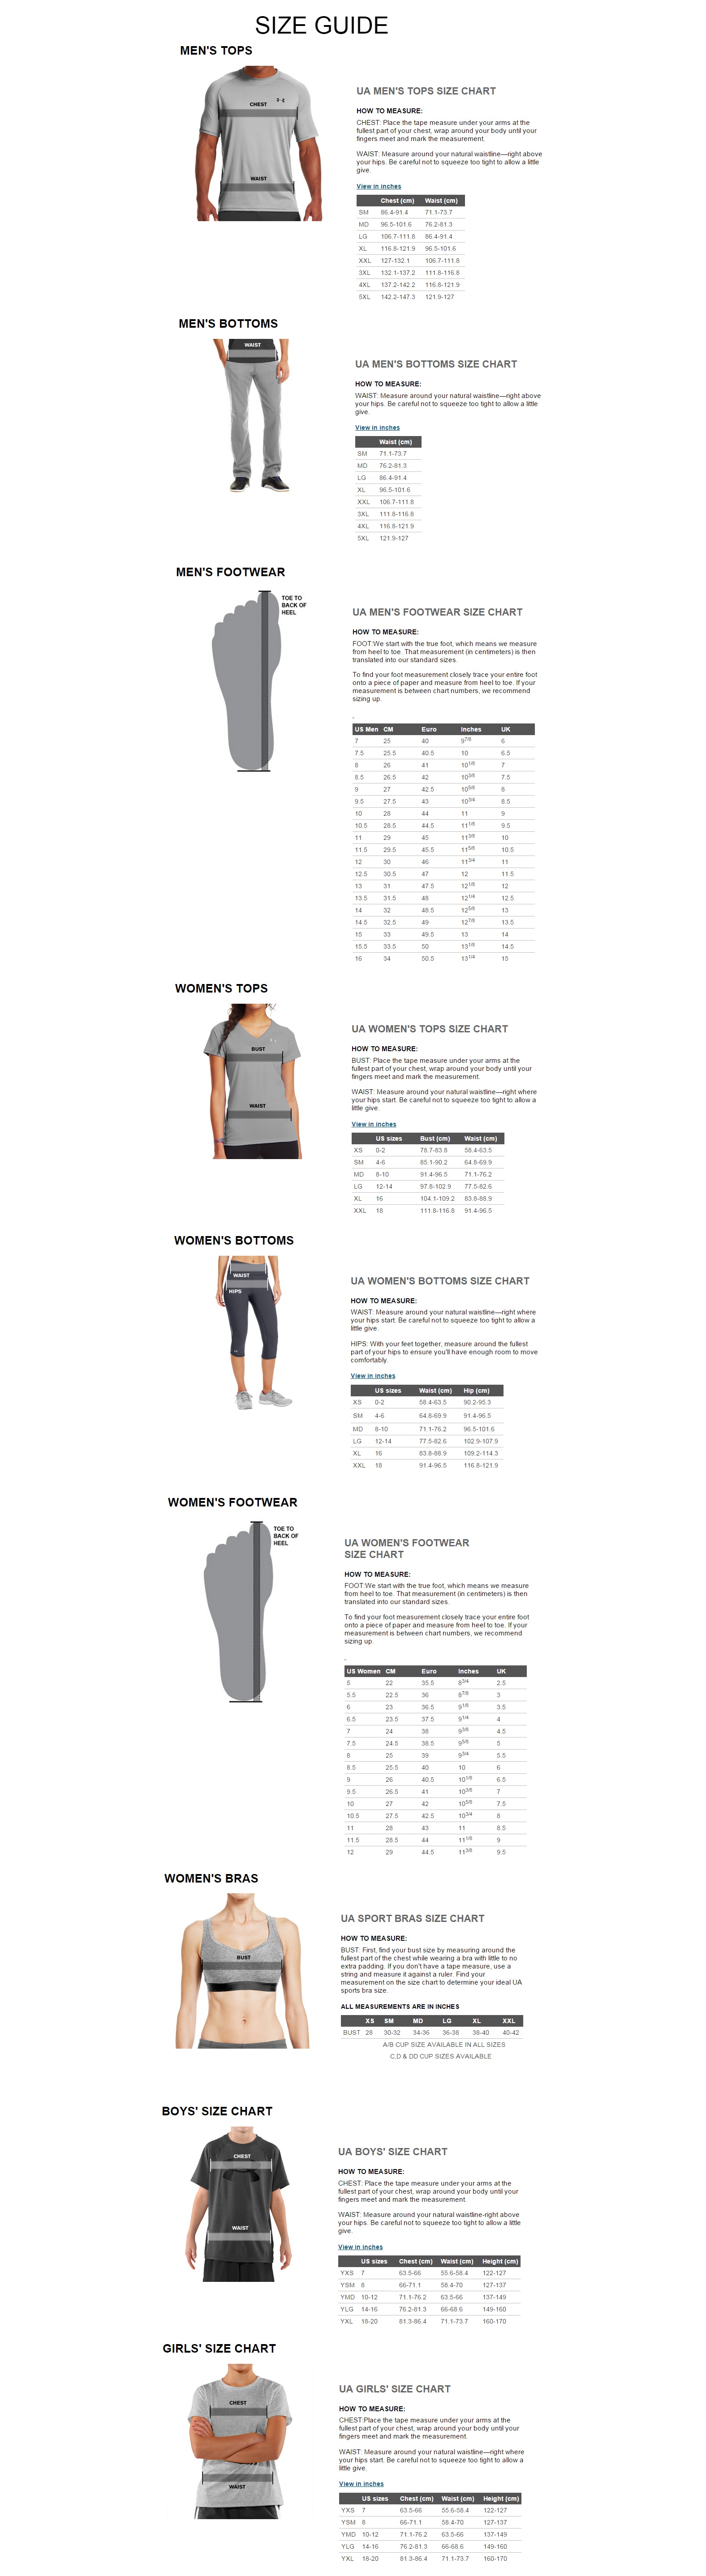 Under Armour Compression Size Chart